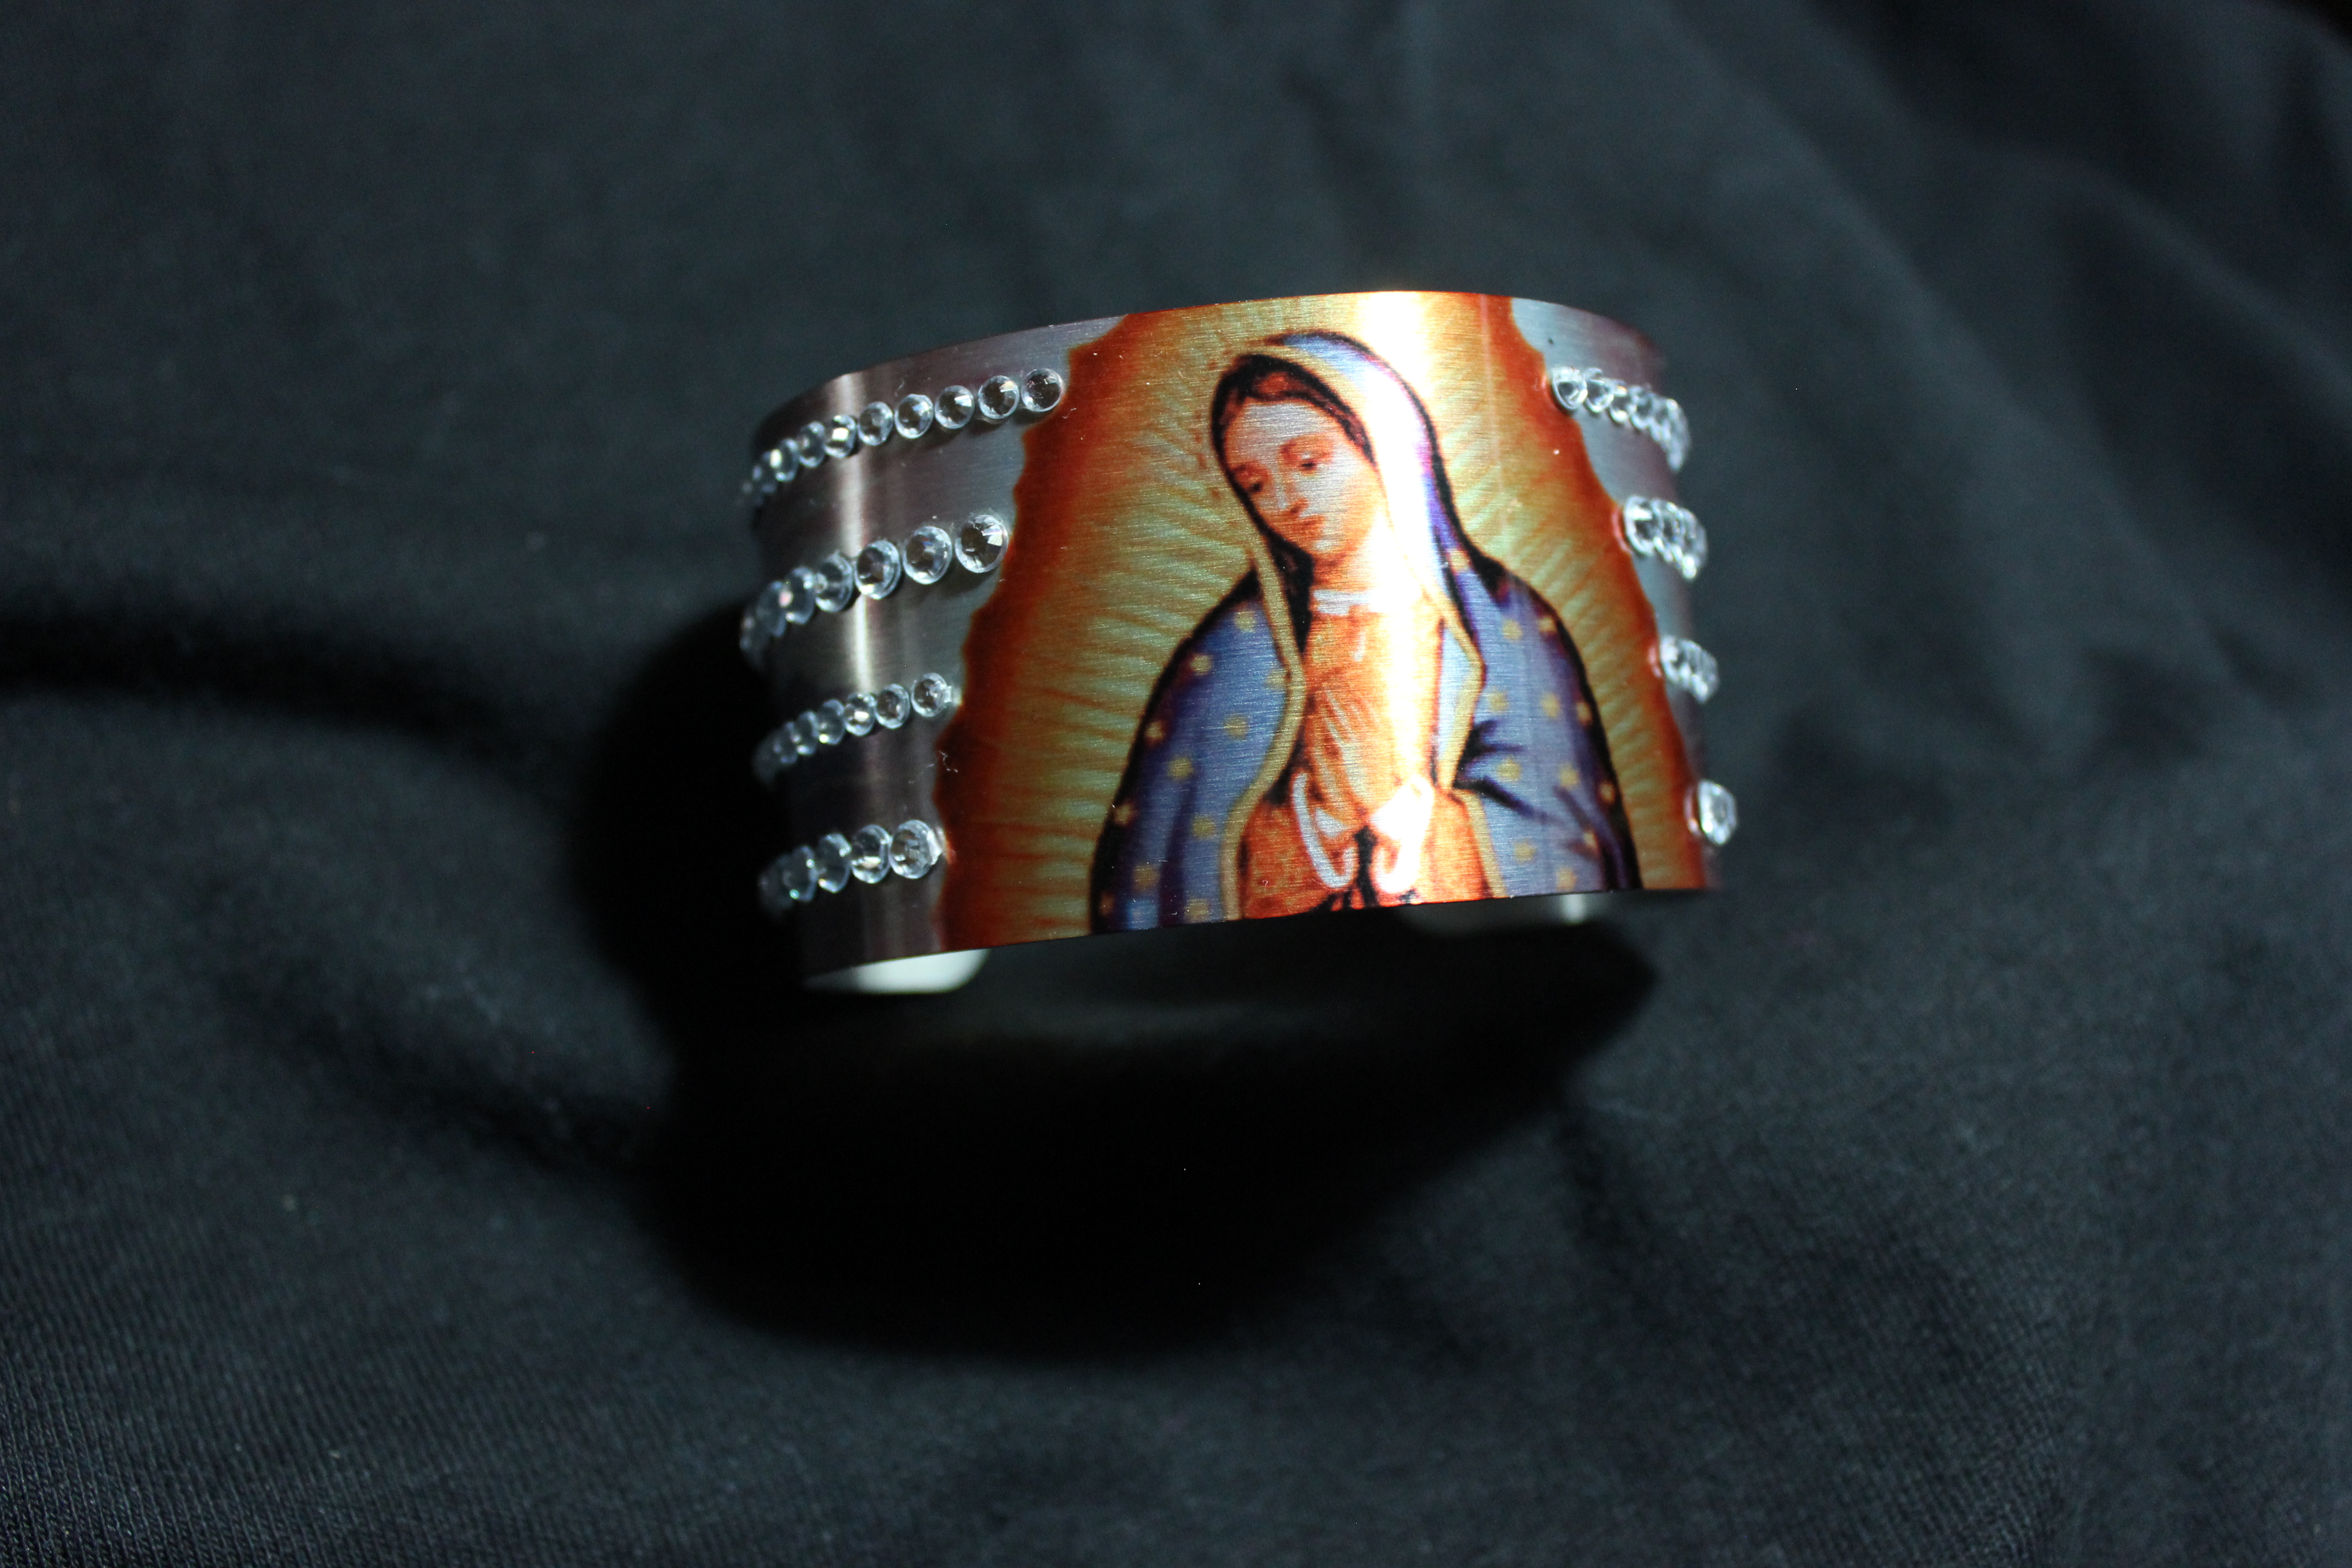 Virgin Mary made with sublimation printing